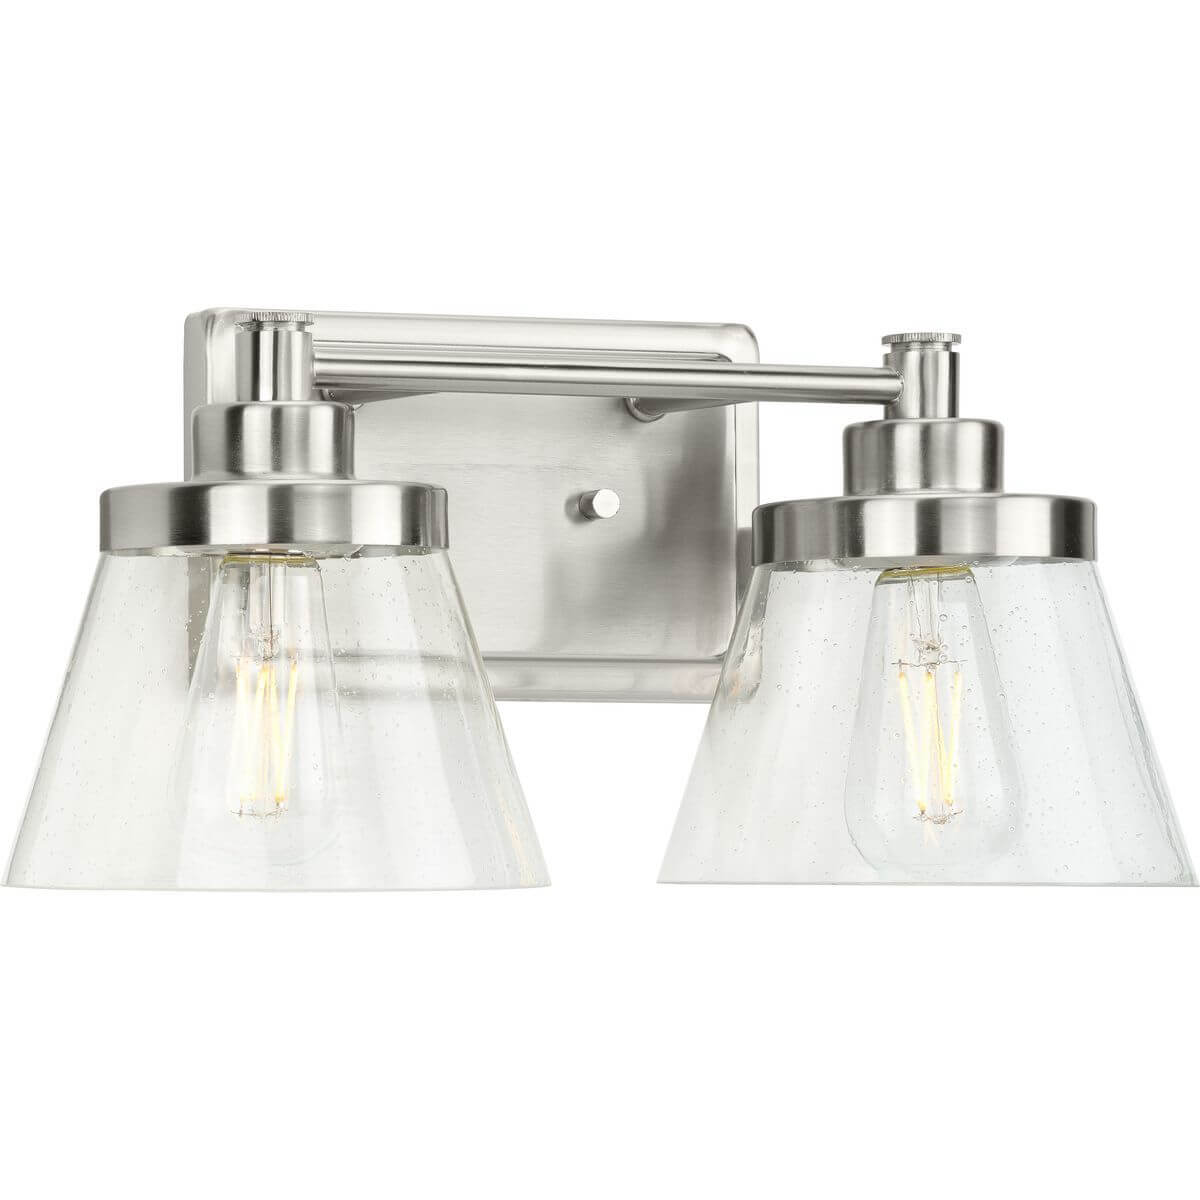 Progress Lighting Hinton 2 Light 16 inch Bath Vanity Light in Brushed Nickel with Clear Seeded Glass P300349-009